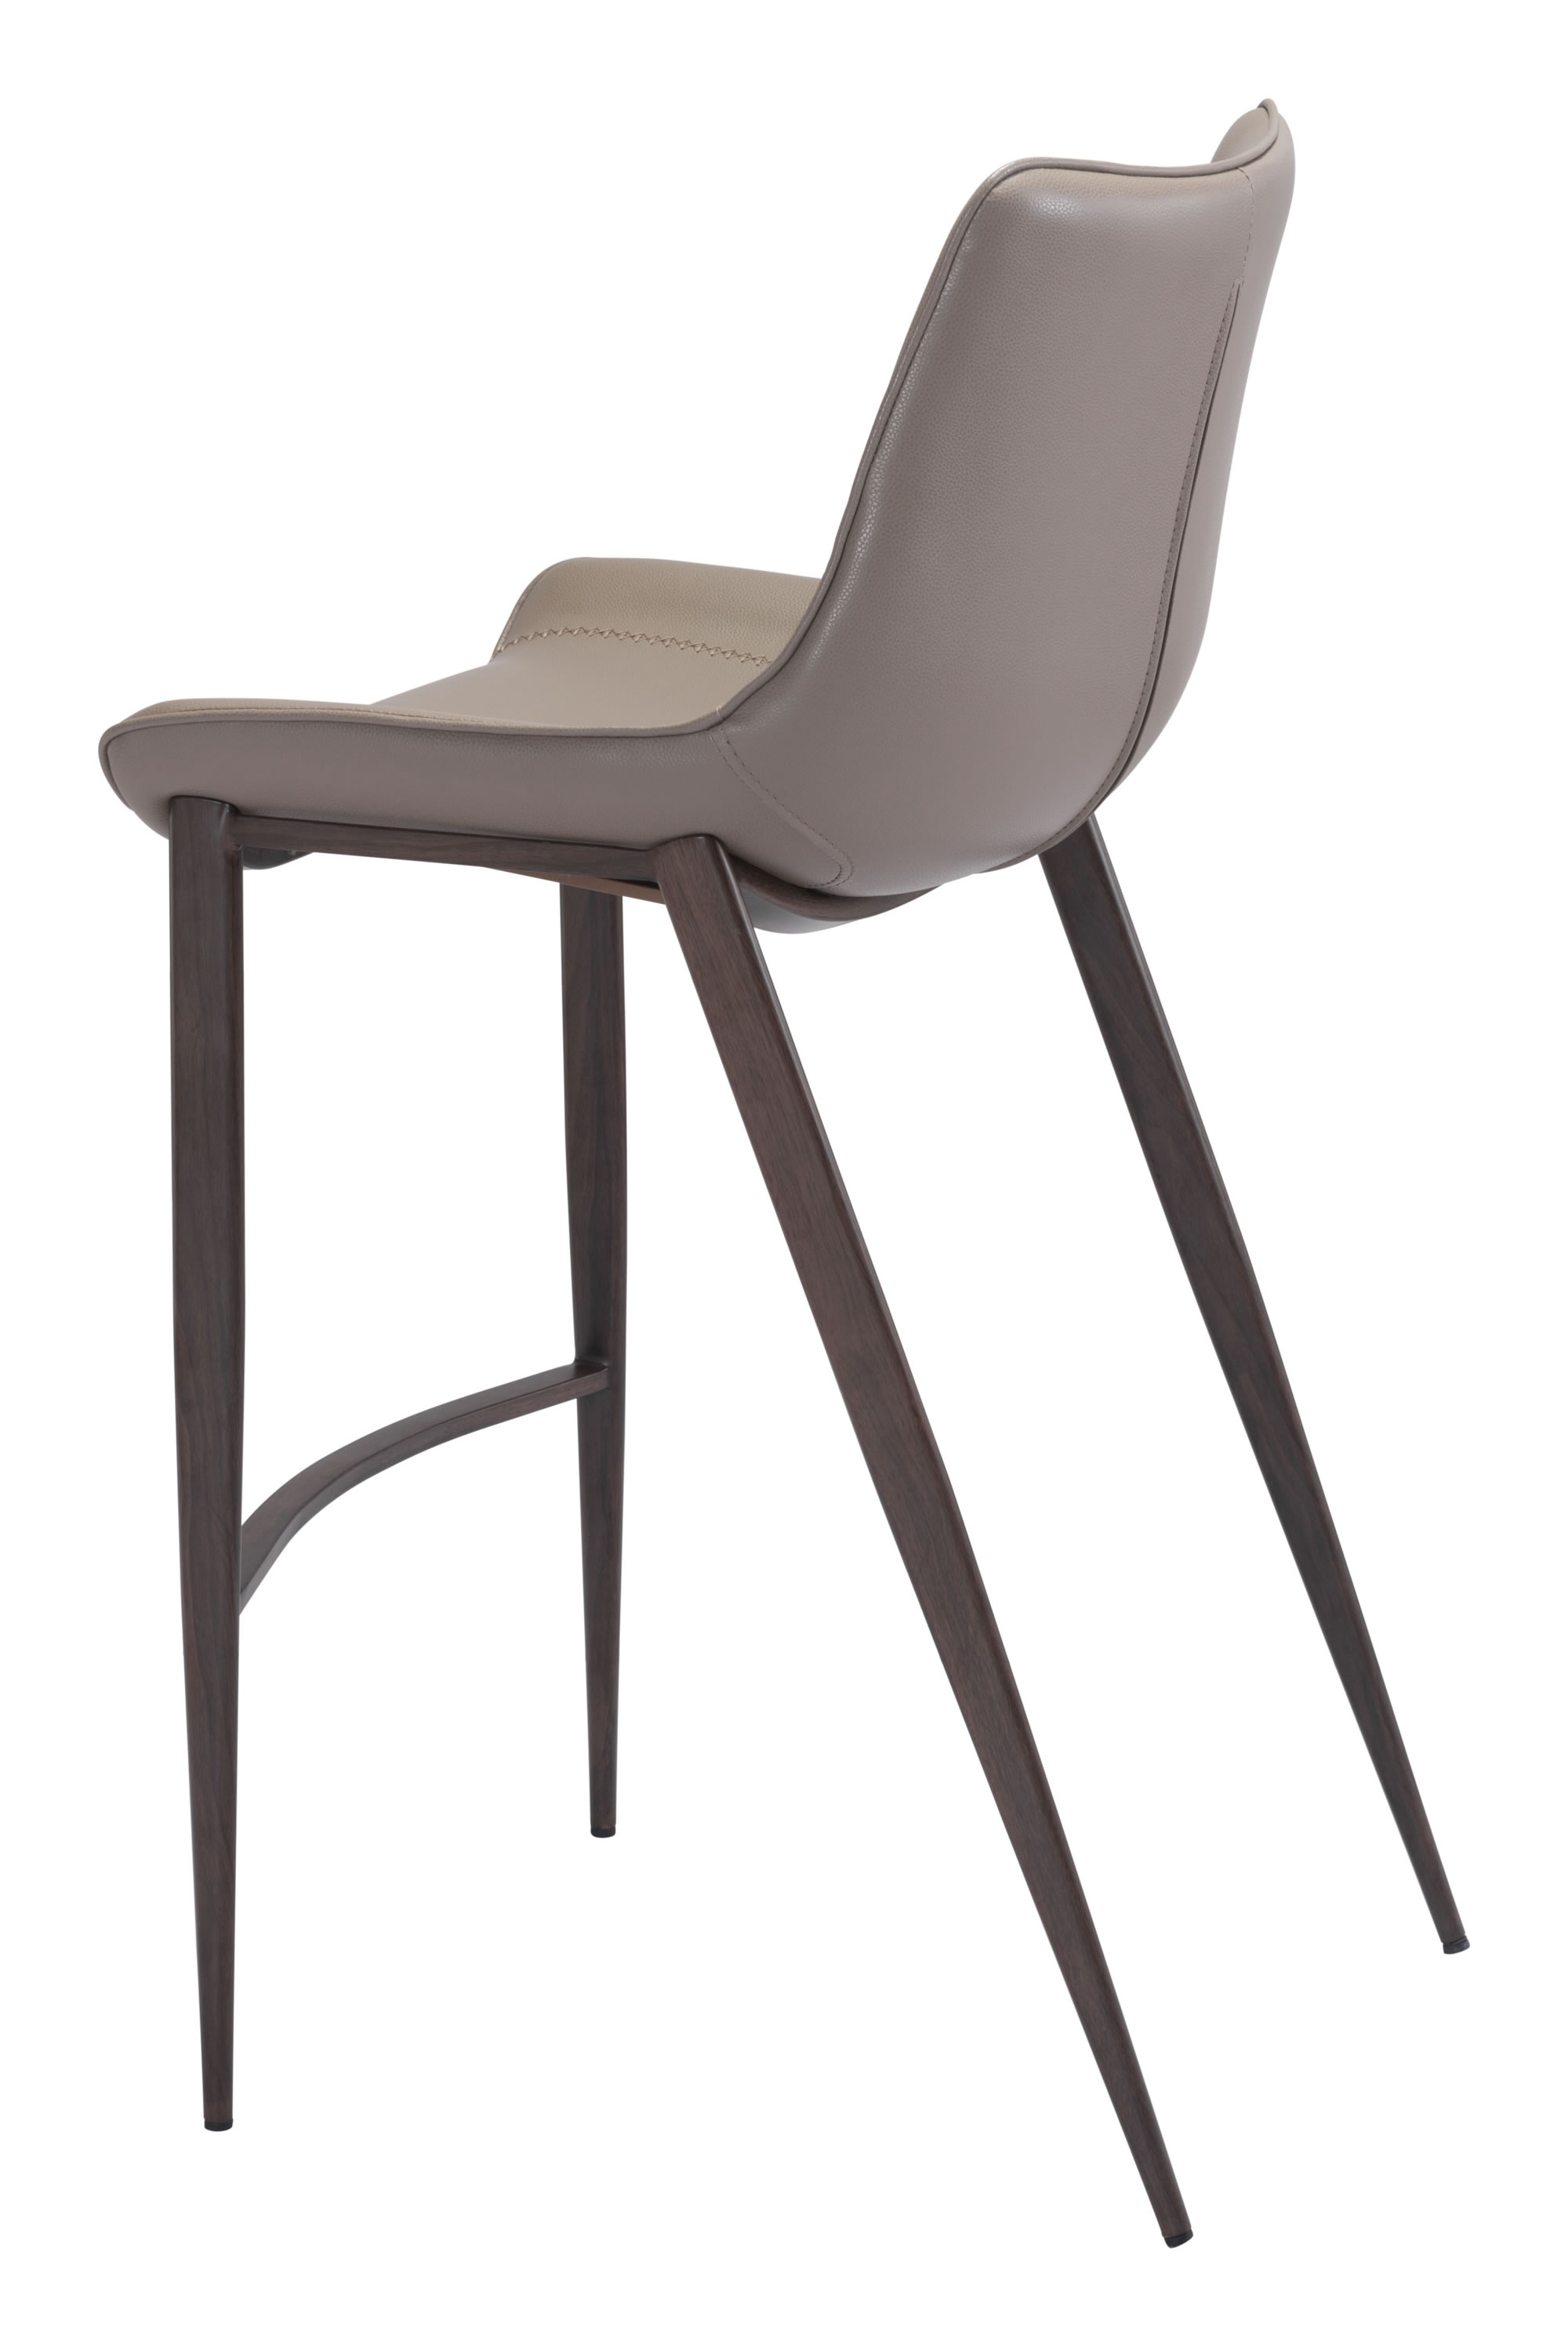 20.7" x 21.7" x 43.3" Gray & Walnut, Leatherette, Brushed Stainless Steel, Bar Chair - Set of 2